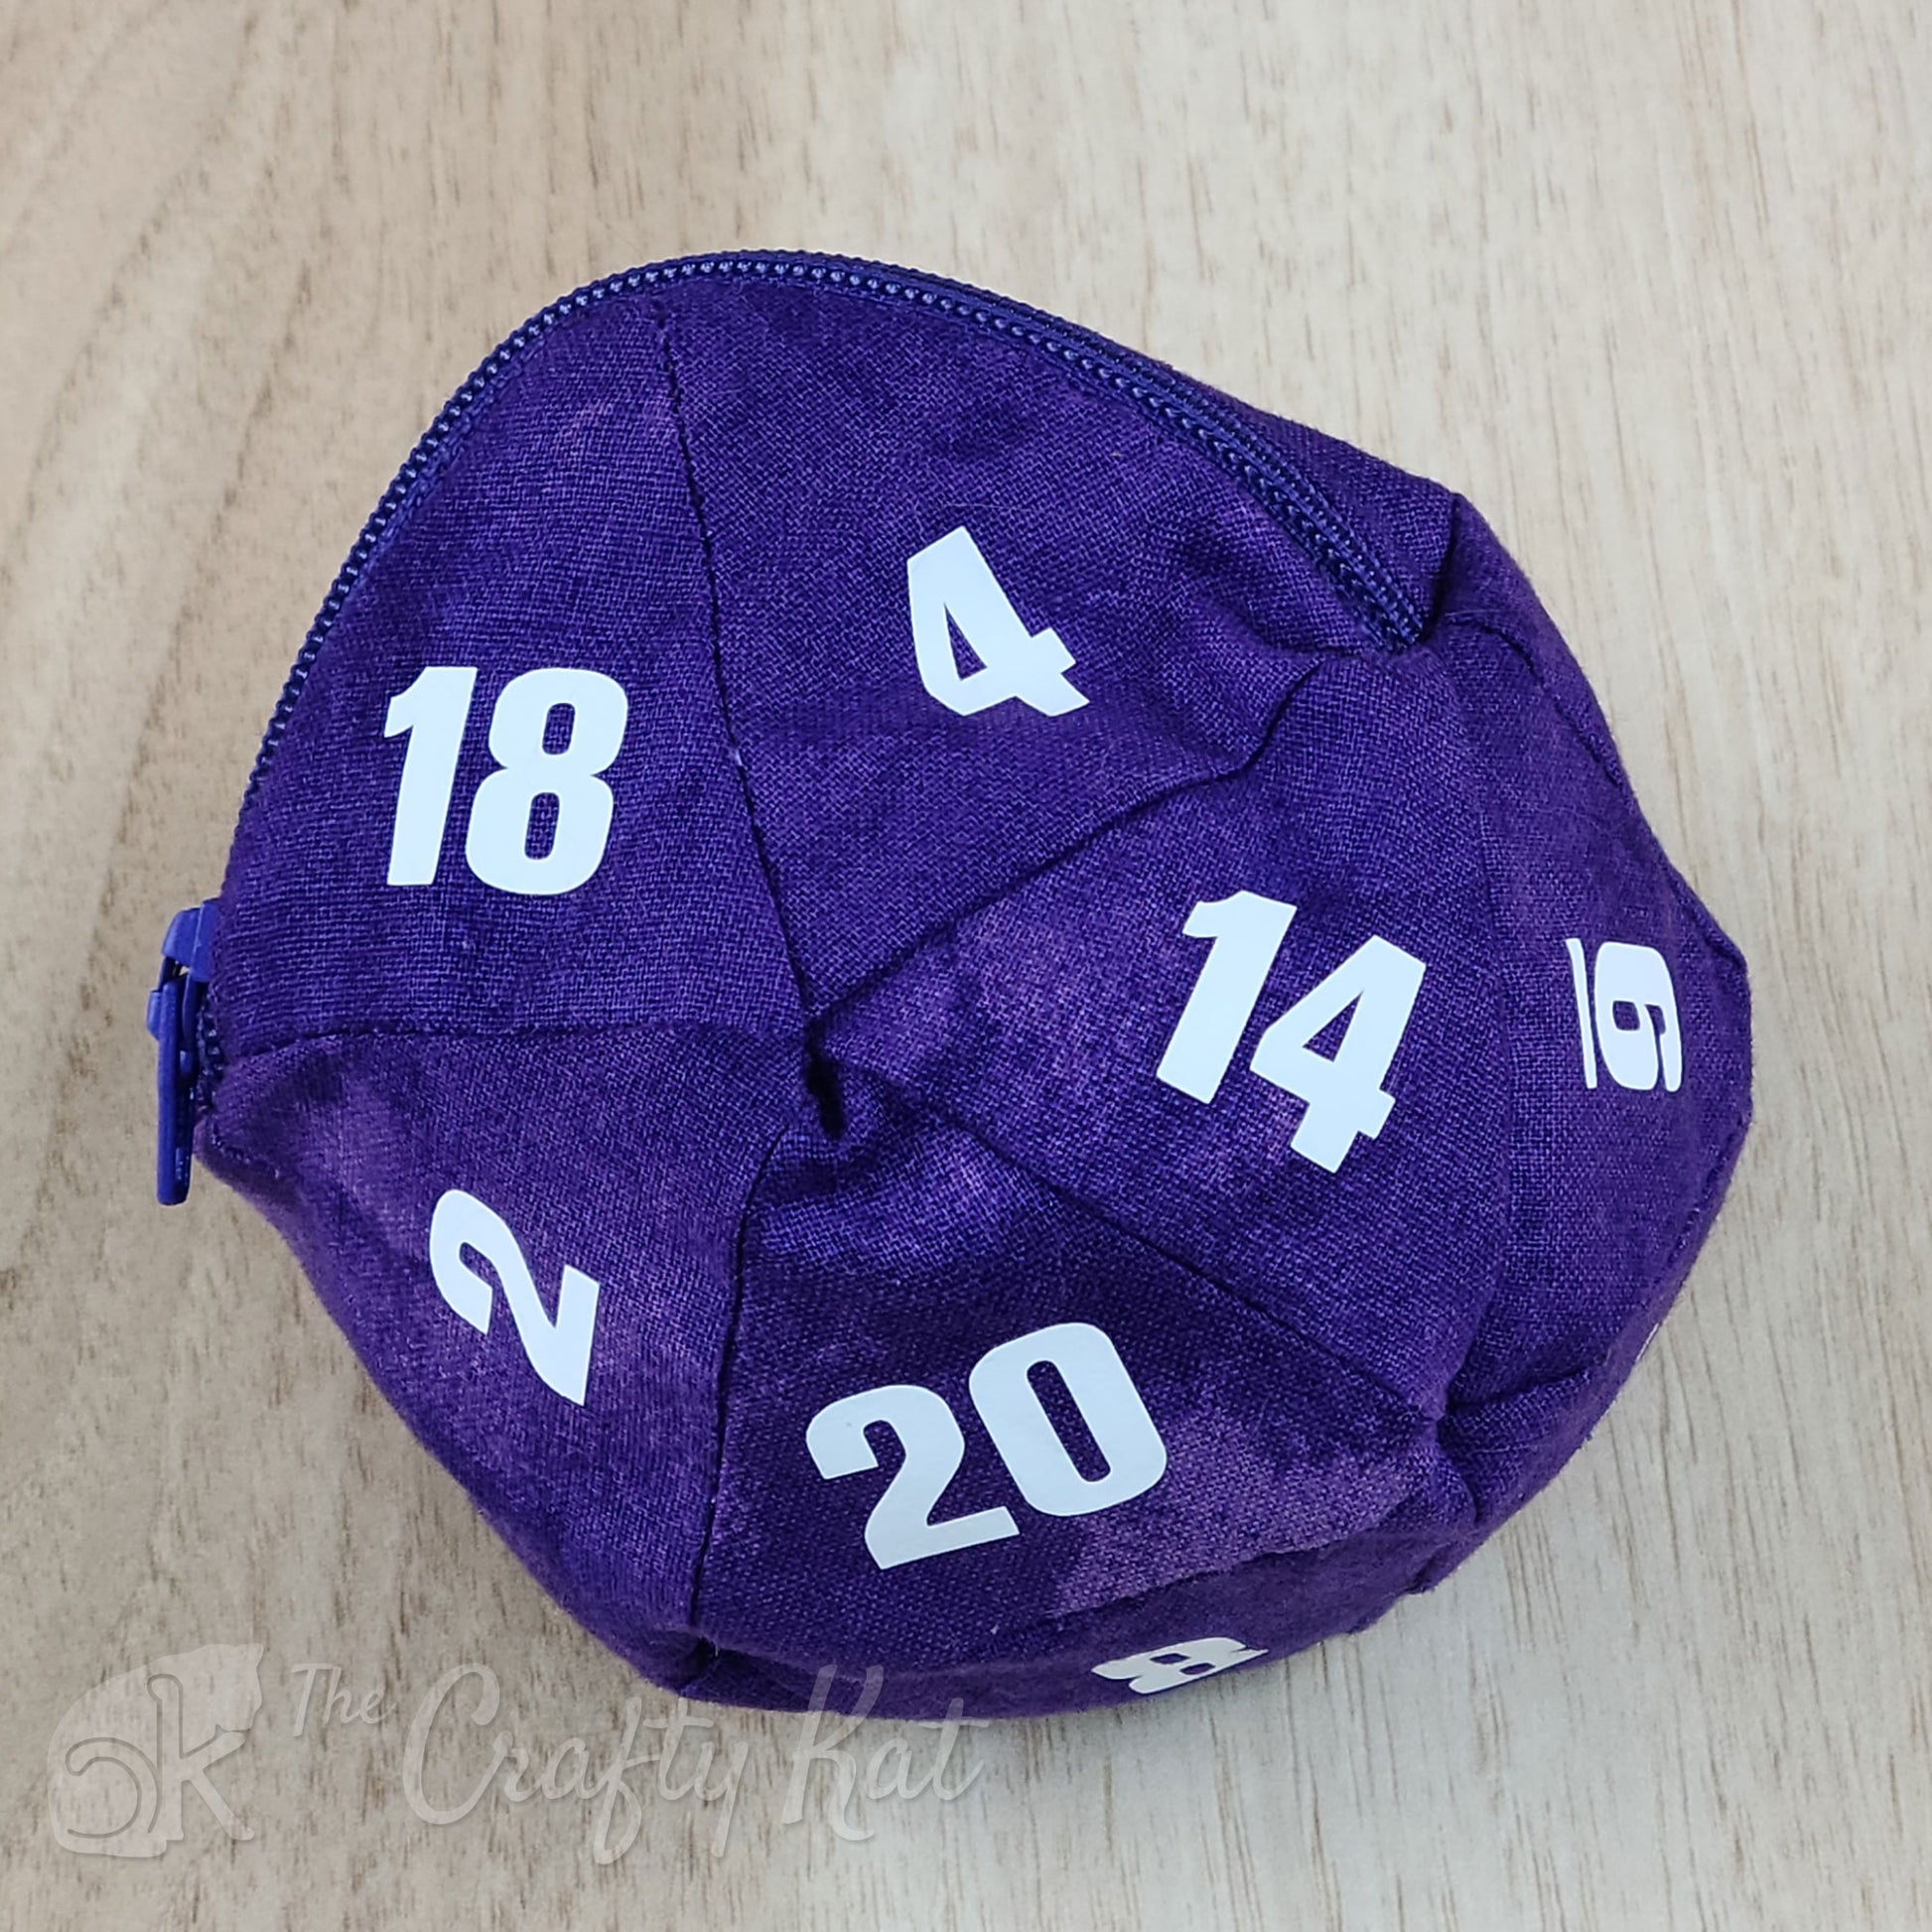 A zippered cotton pouch in the shape of a twenty-sided die, commonly referred to as a d20. The bag shown is purple with white numbers.